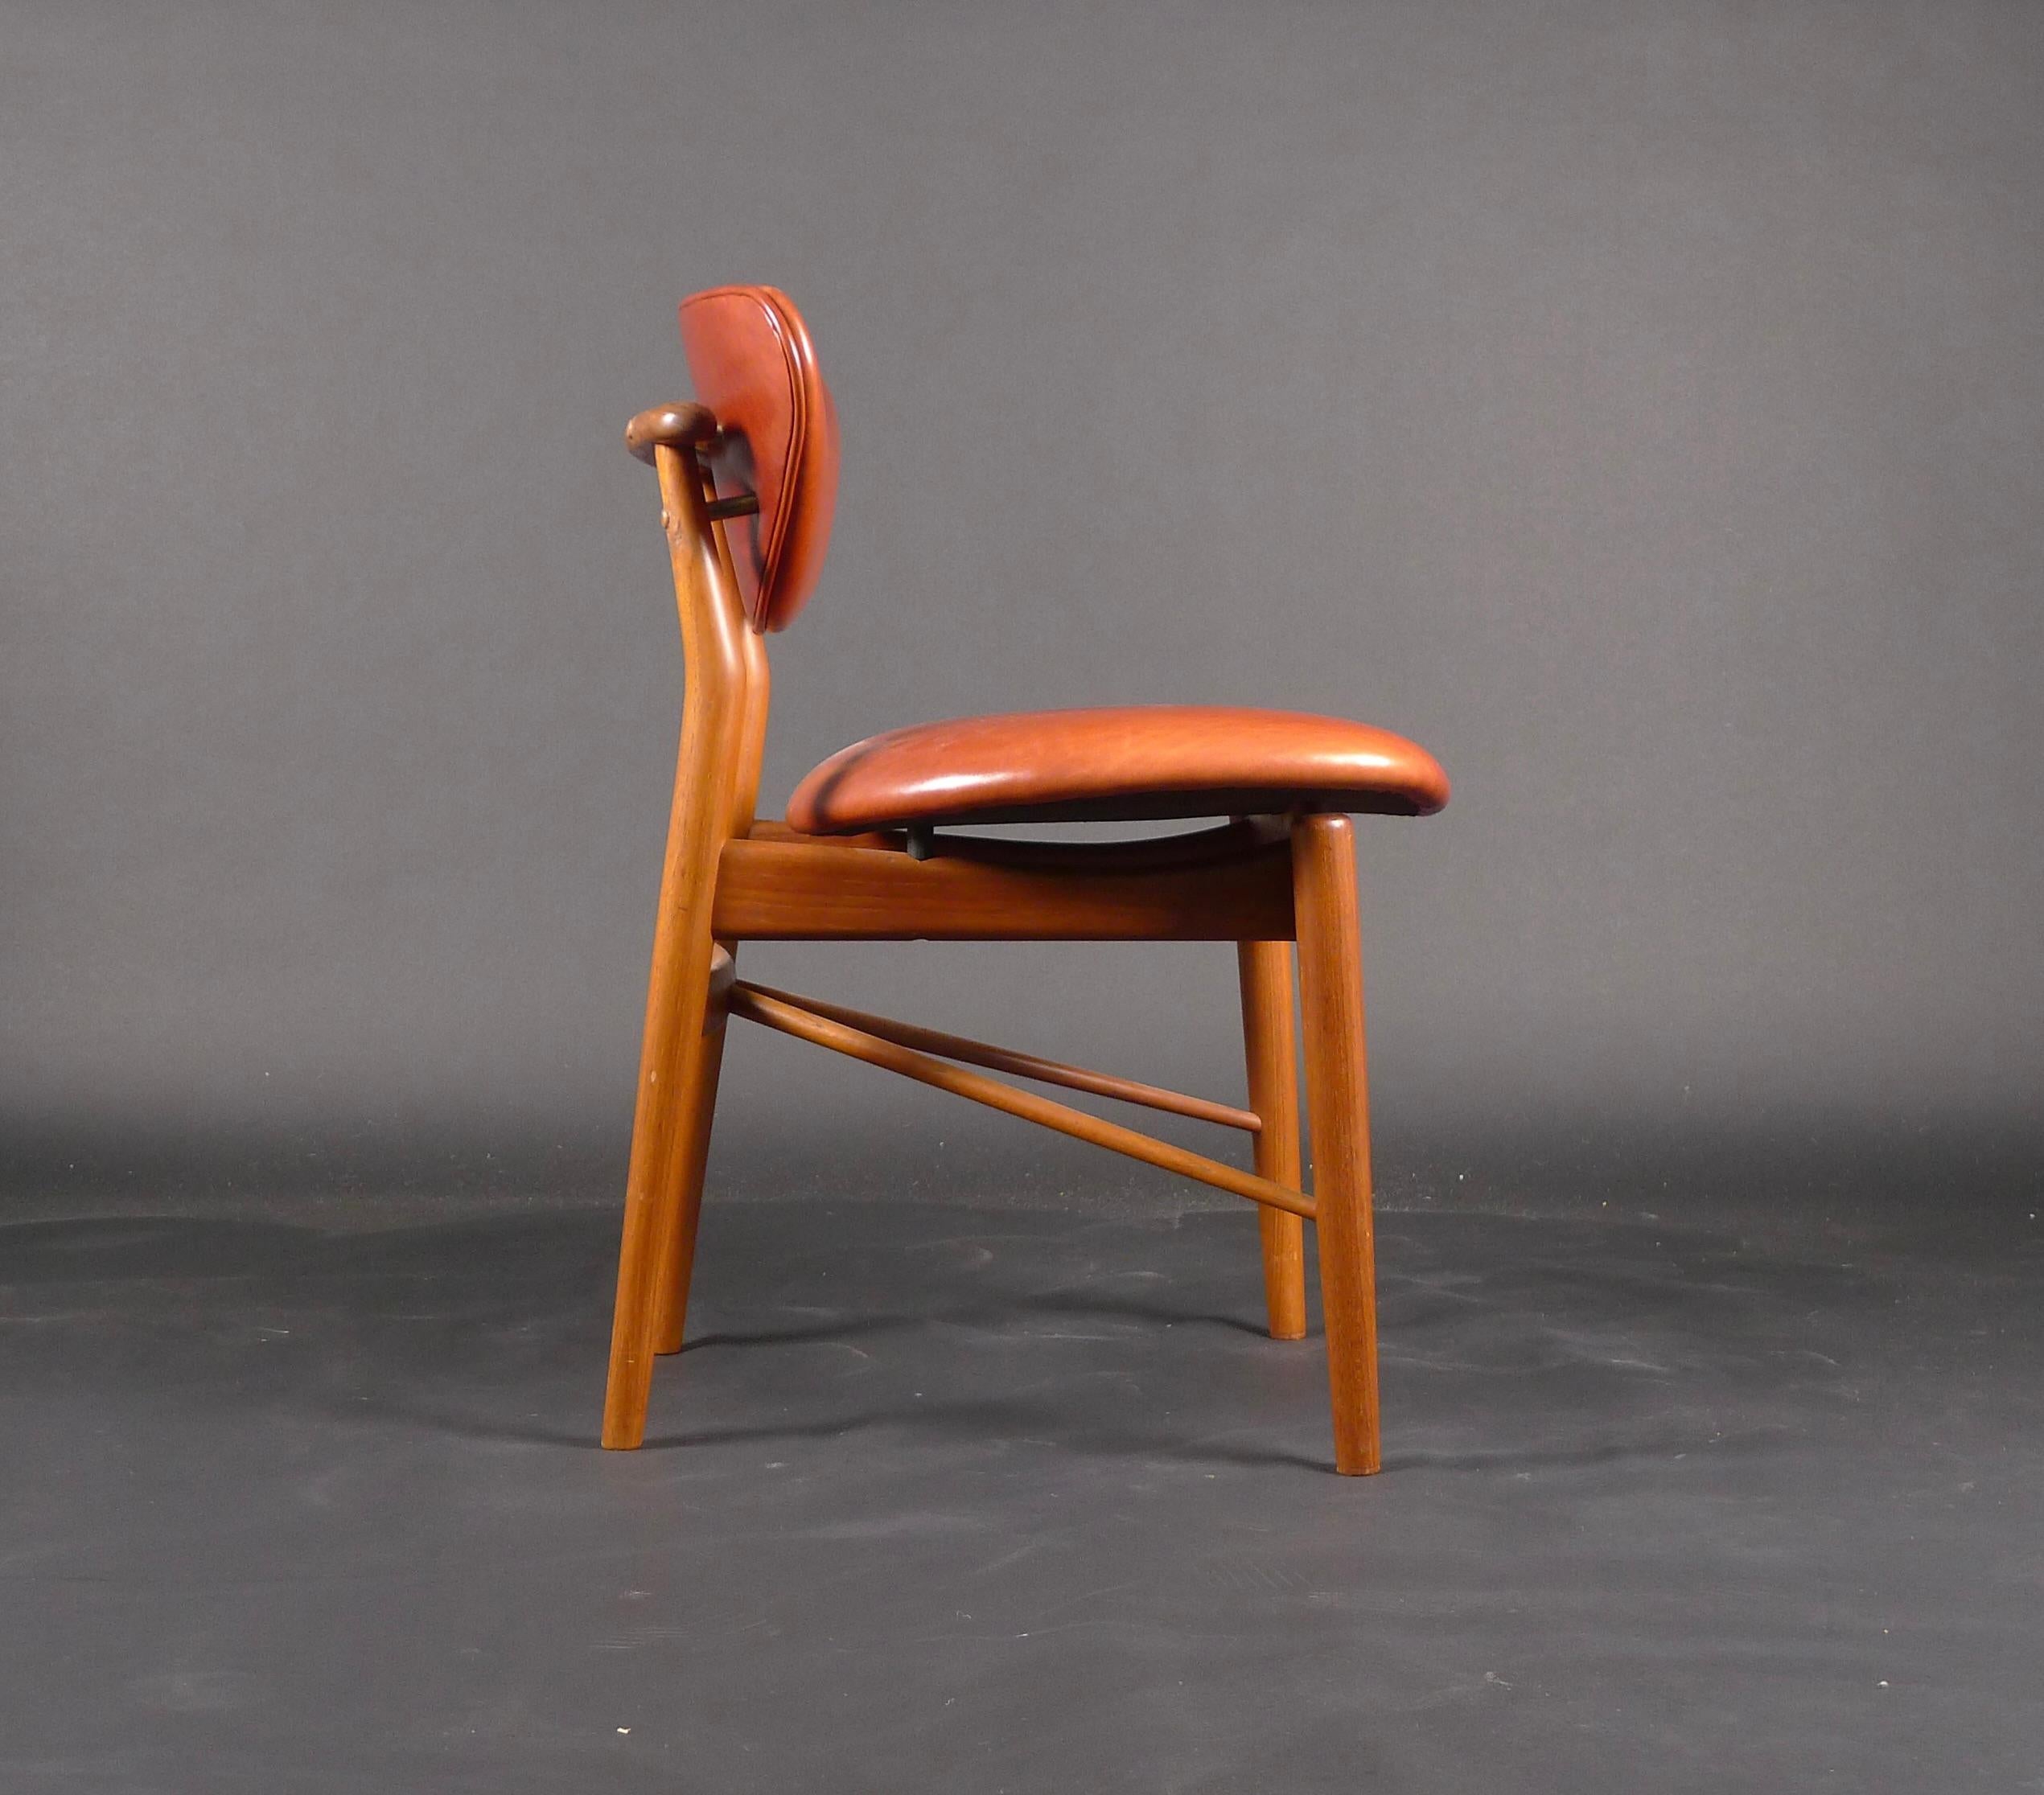 Finn Juhl, teak 108 Chair, 1946, made by Niels Vodder, Copenhagen, stamped

This is an early original chair, made by cabinet maker Niels Vodder in Copenhagen and bearing the stamped mark (see image). The condition is very good, and the chair has